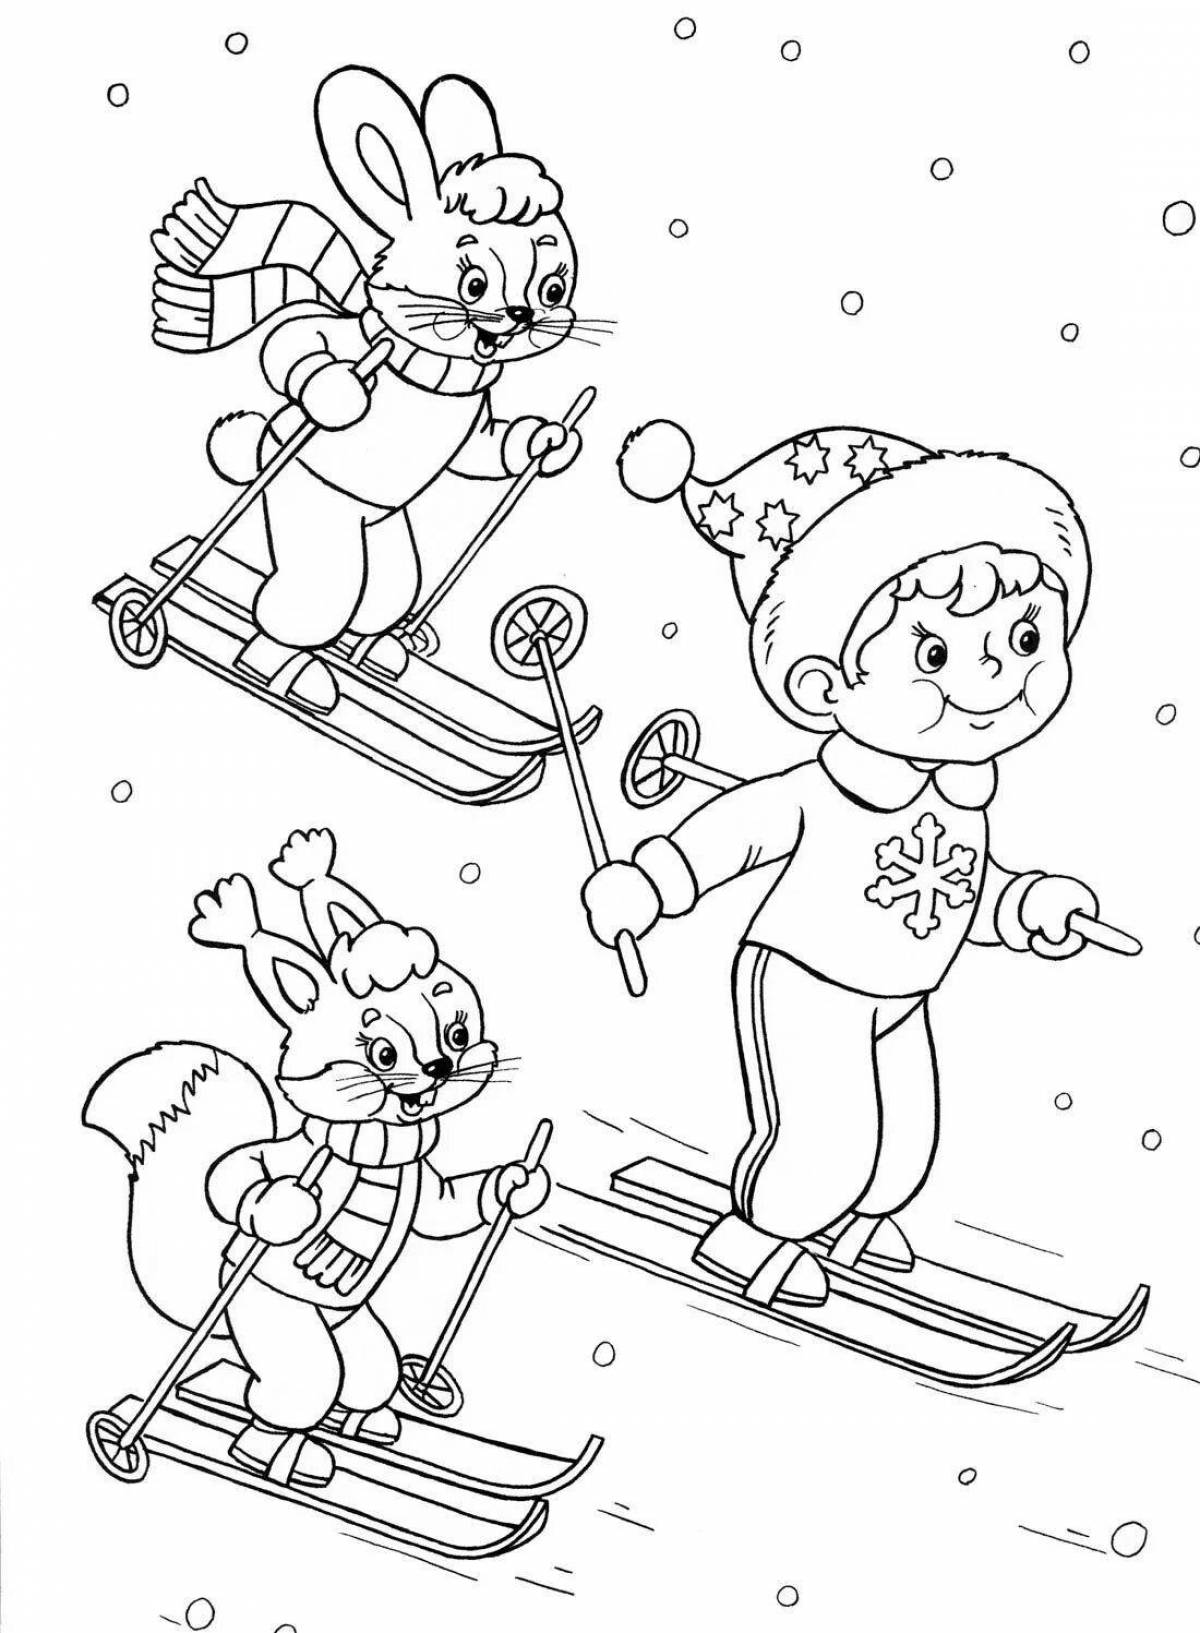 Exciting winter coloring book for 4-5 year olds